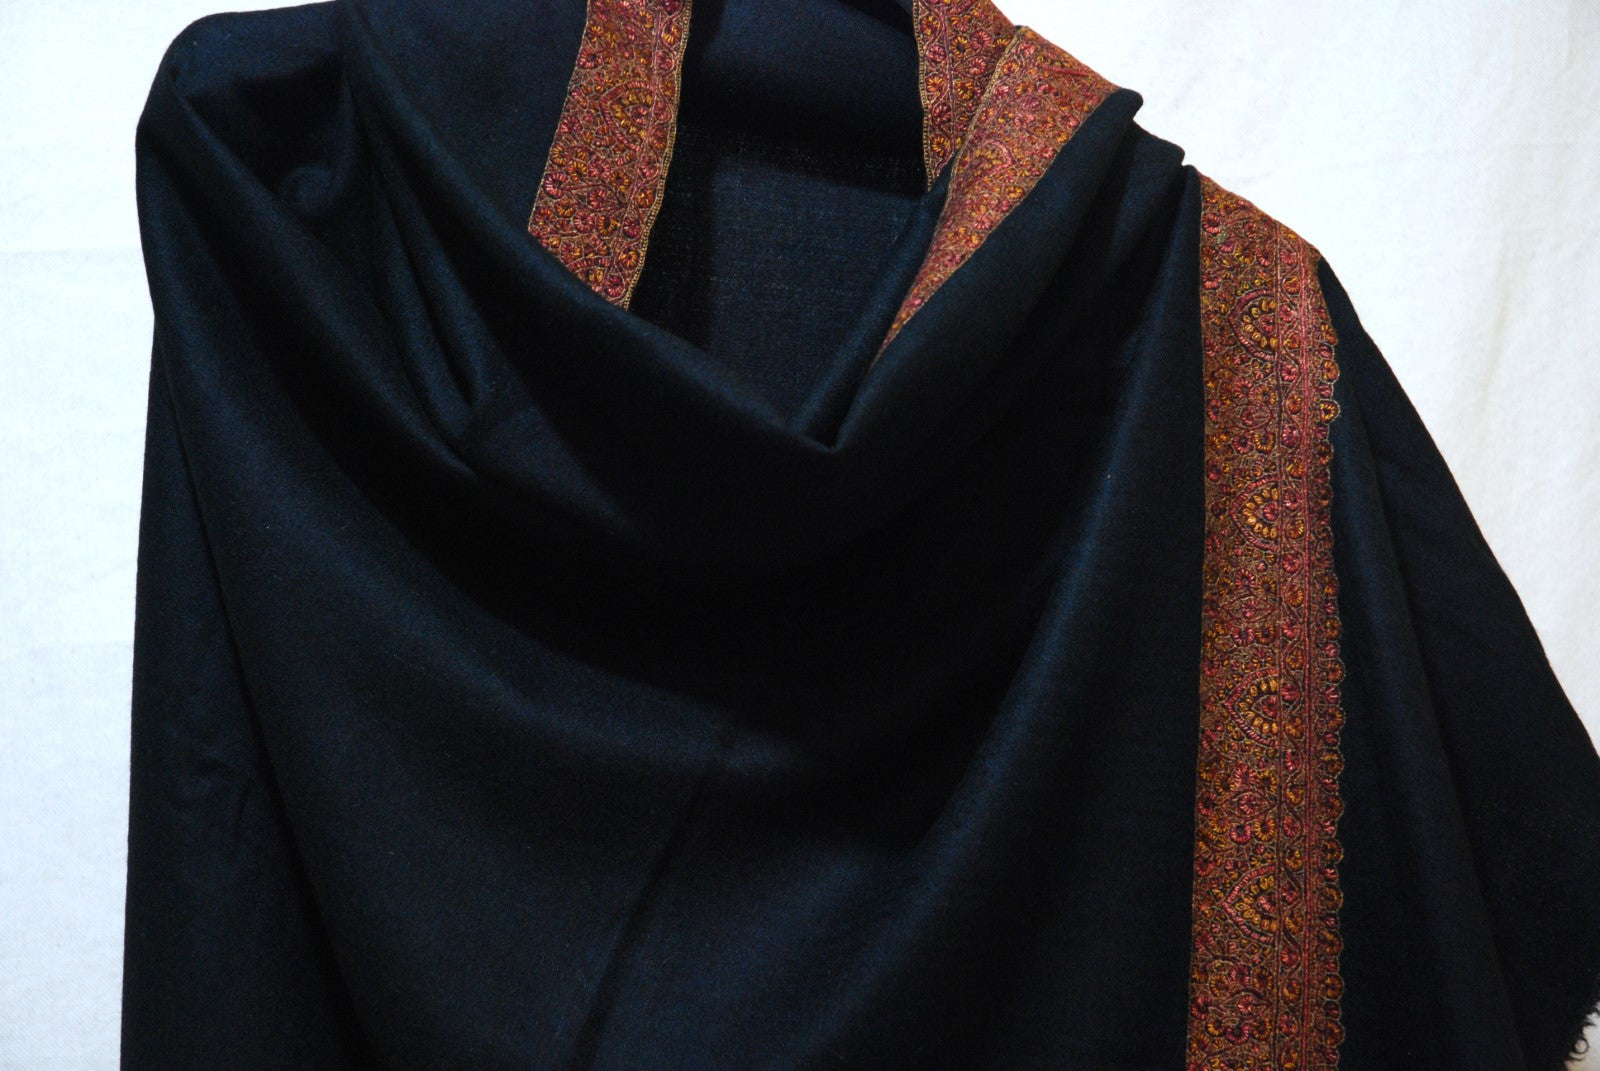 Kashmir Pashmina "Cashmere" Embroidered Shawl Black, Multicolor Embroidery #PDR-006